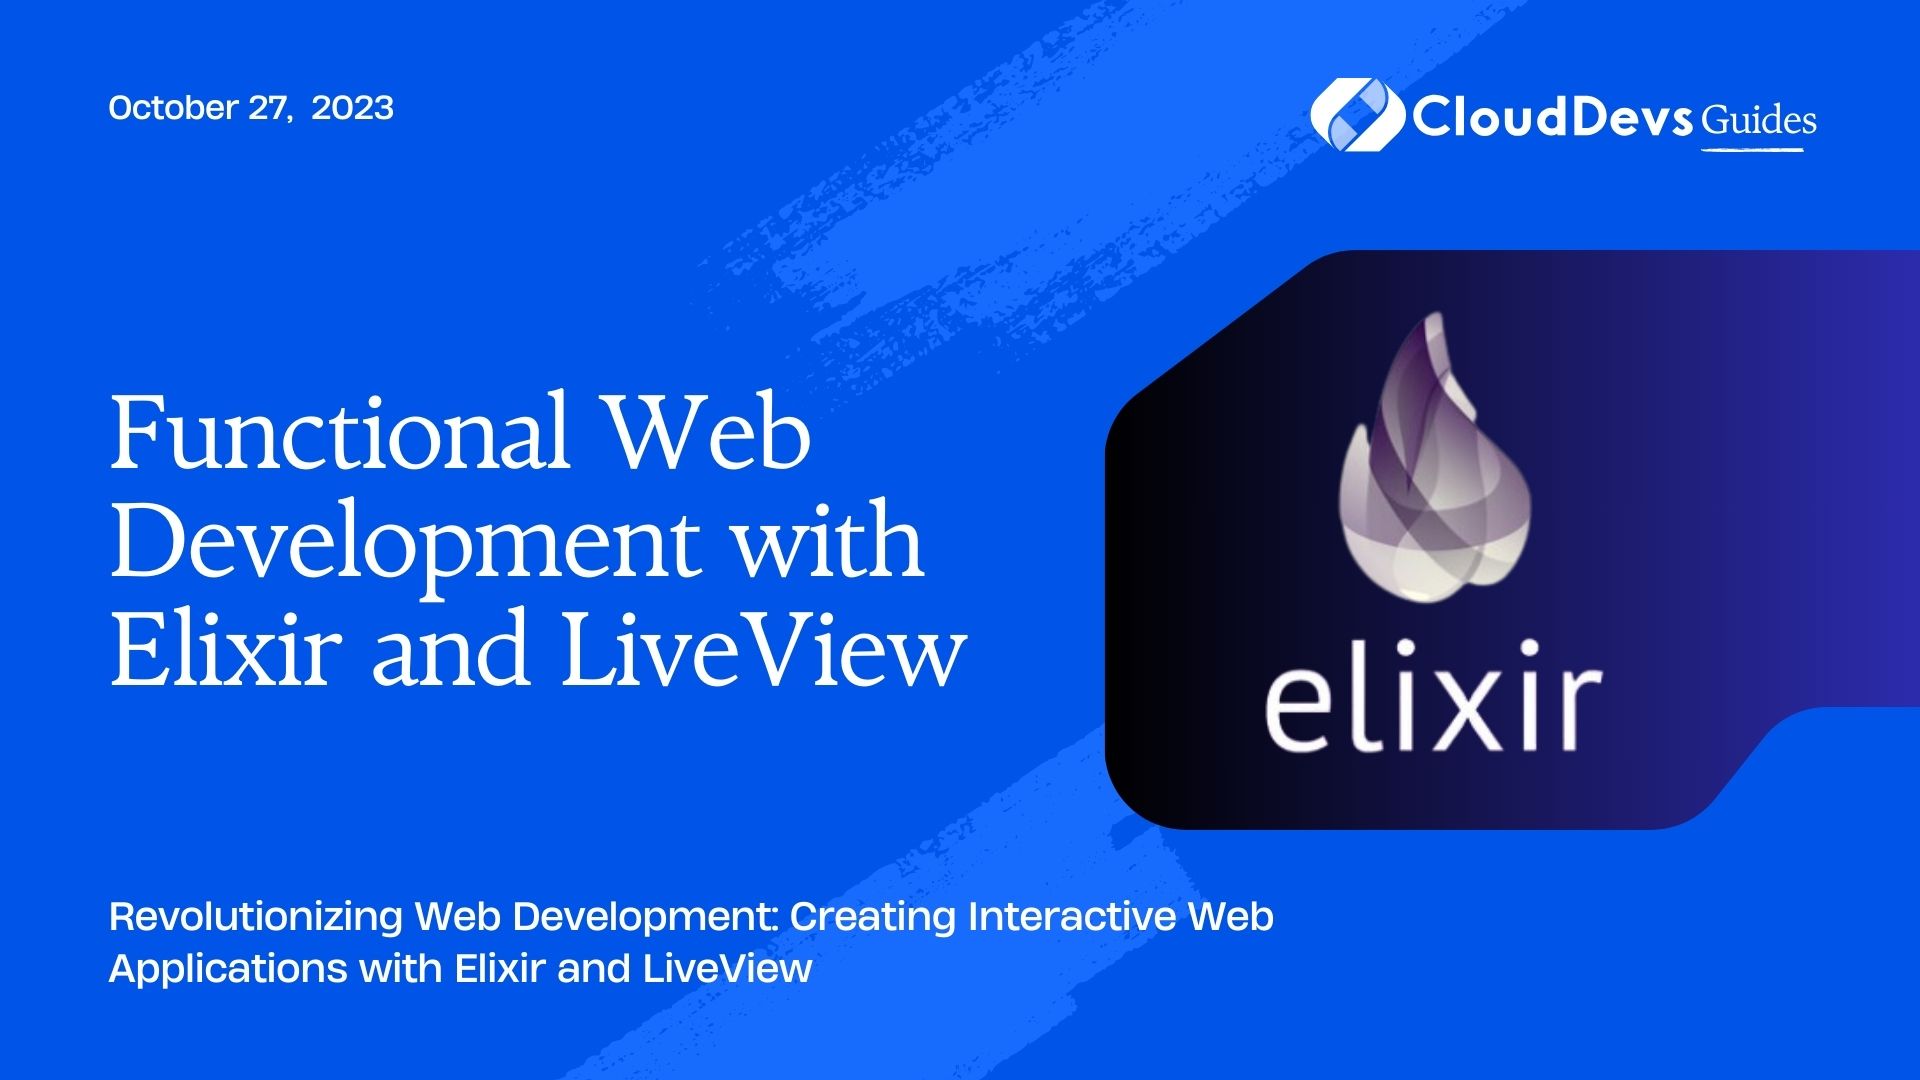 Functional Web Development with Elixir and LiveView